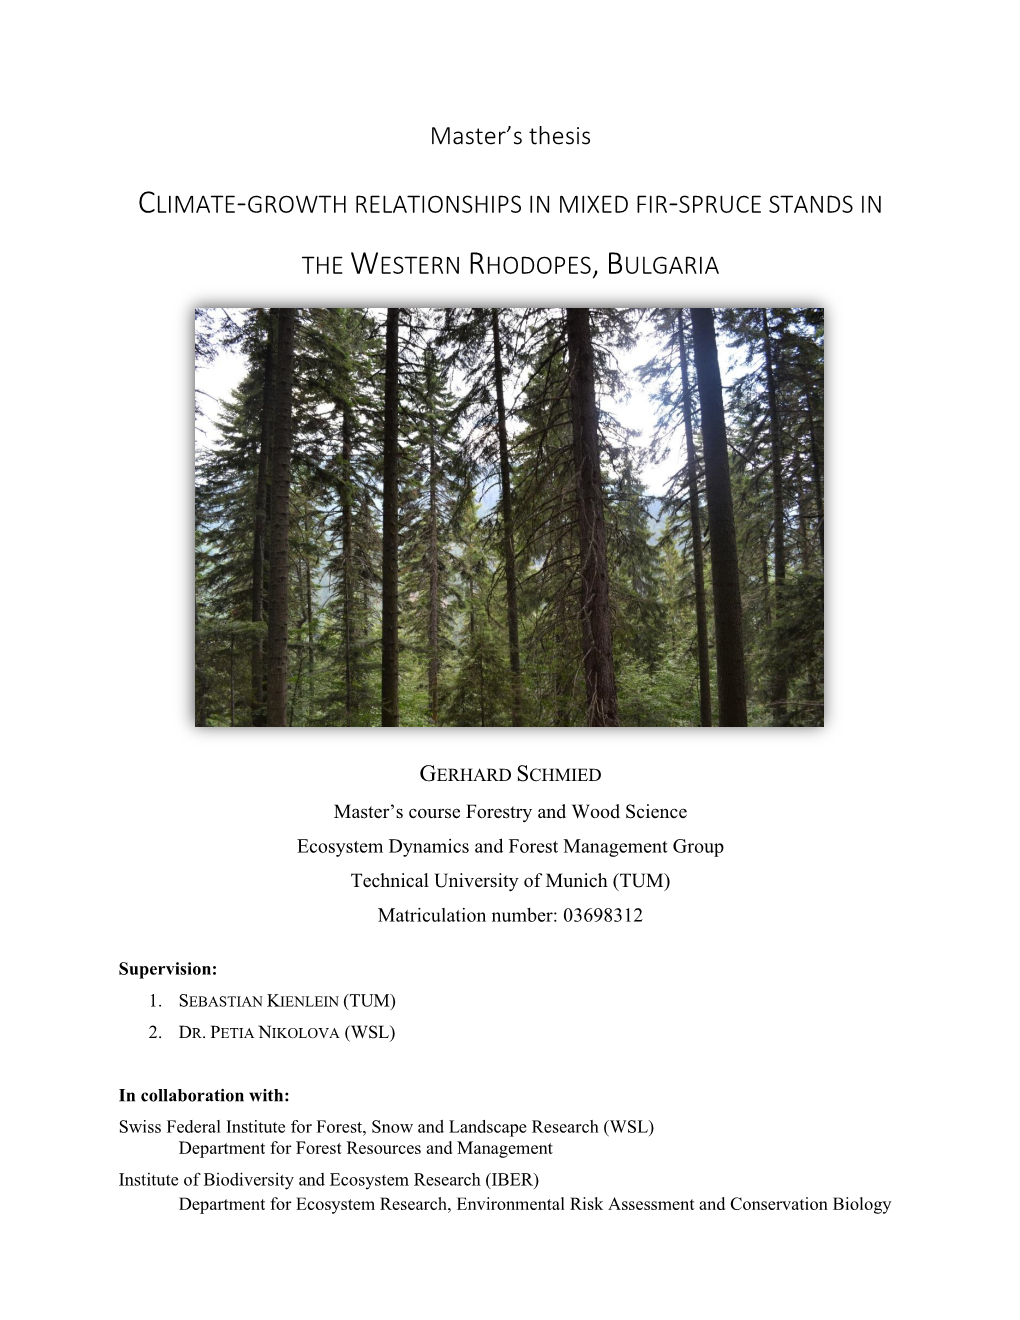 Master's Thesis CLIMATE-GROWTH RELATIONSHIPS in MIXED FIR